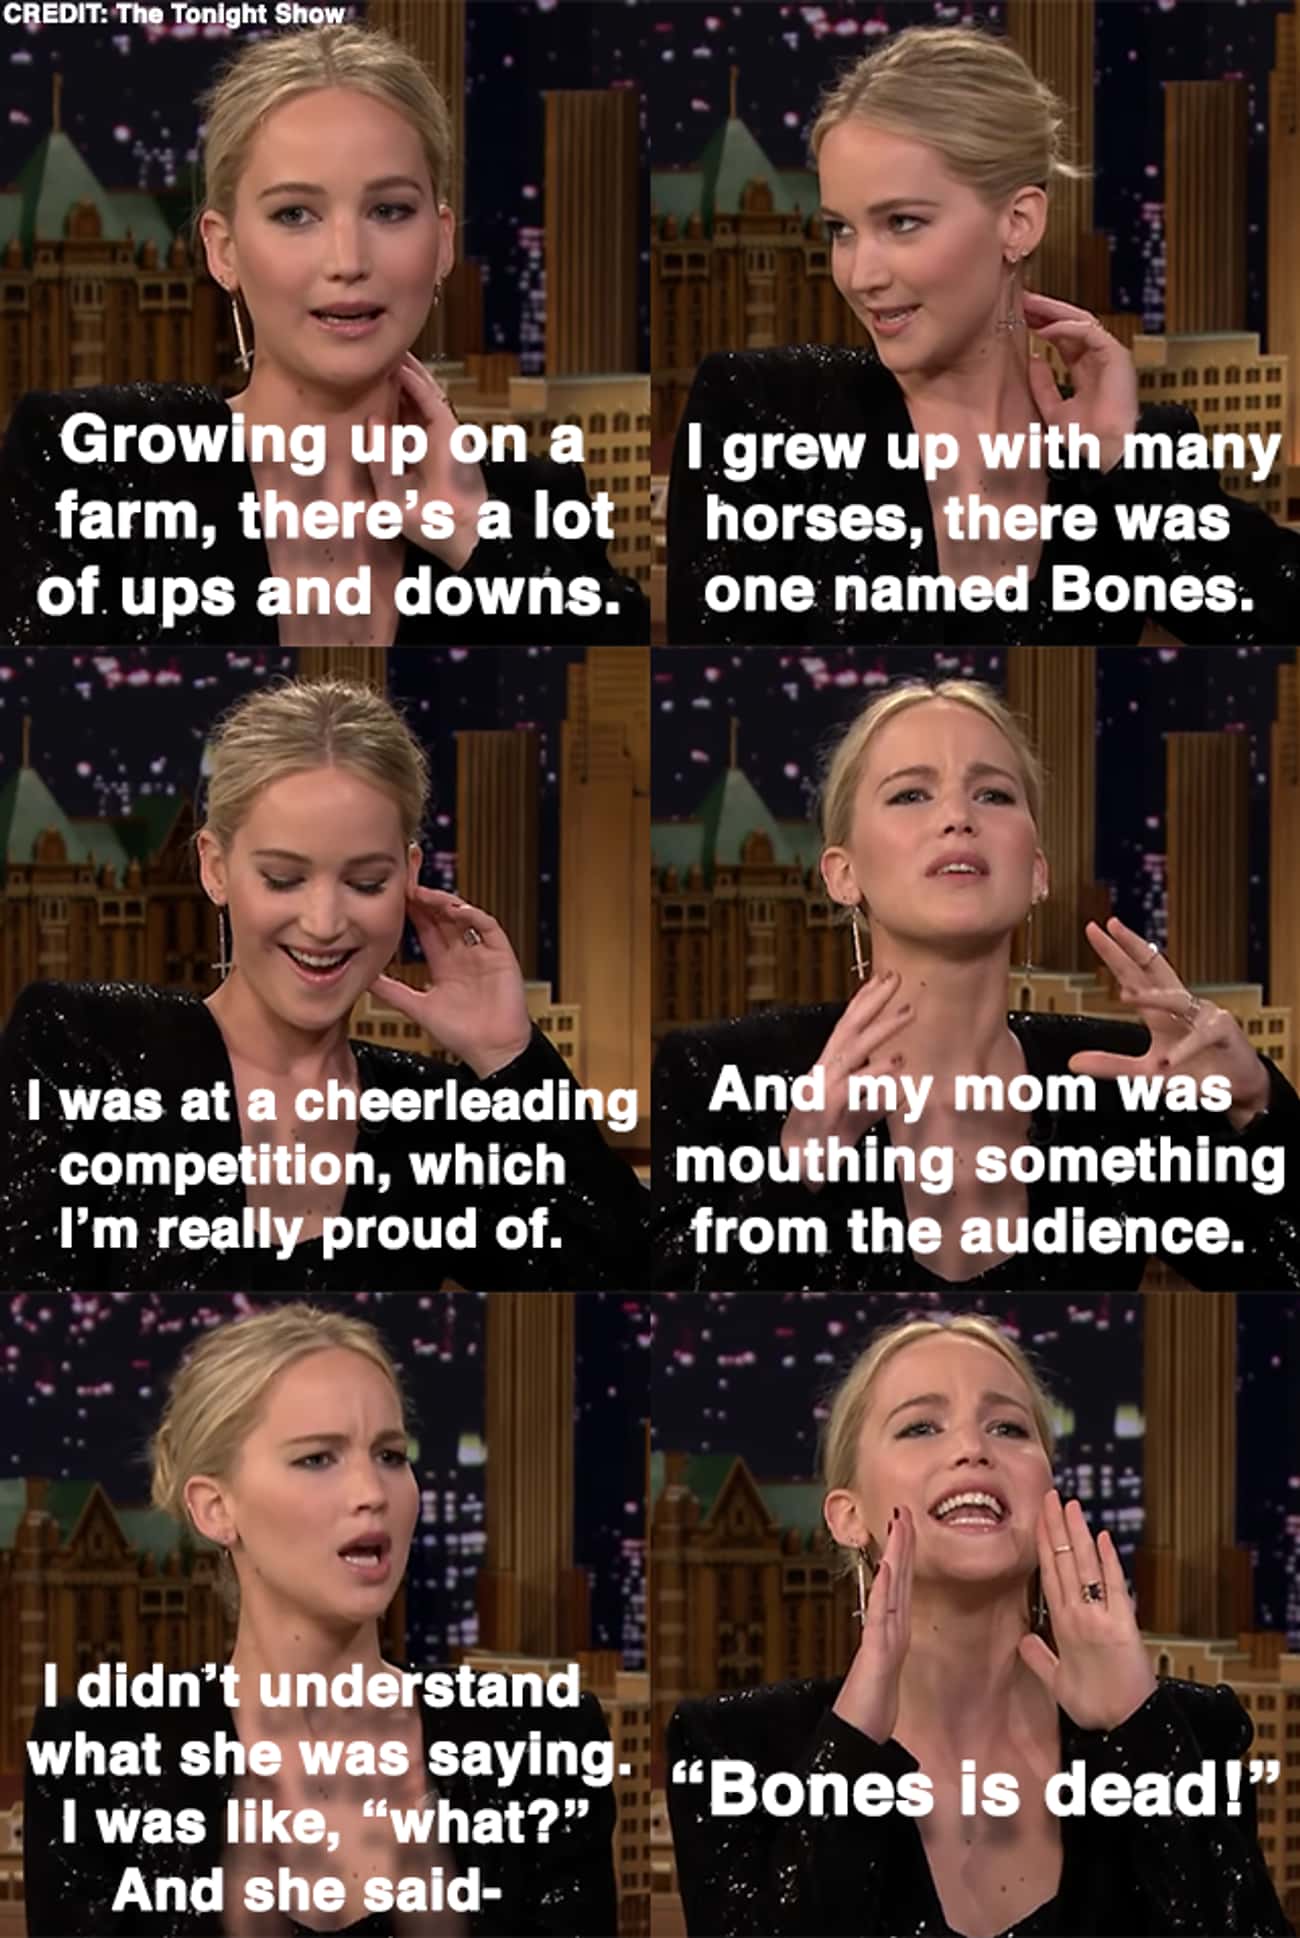 Jennifer Lawrence's Mom Gave Her Some Bad News During a Cheerleading Competition